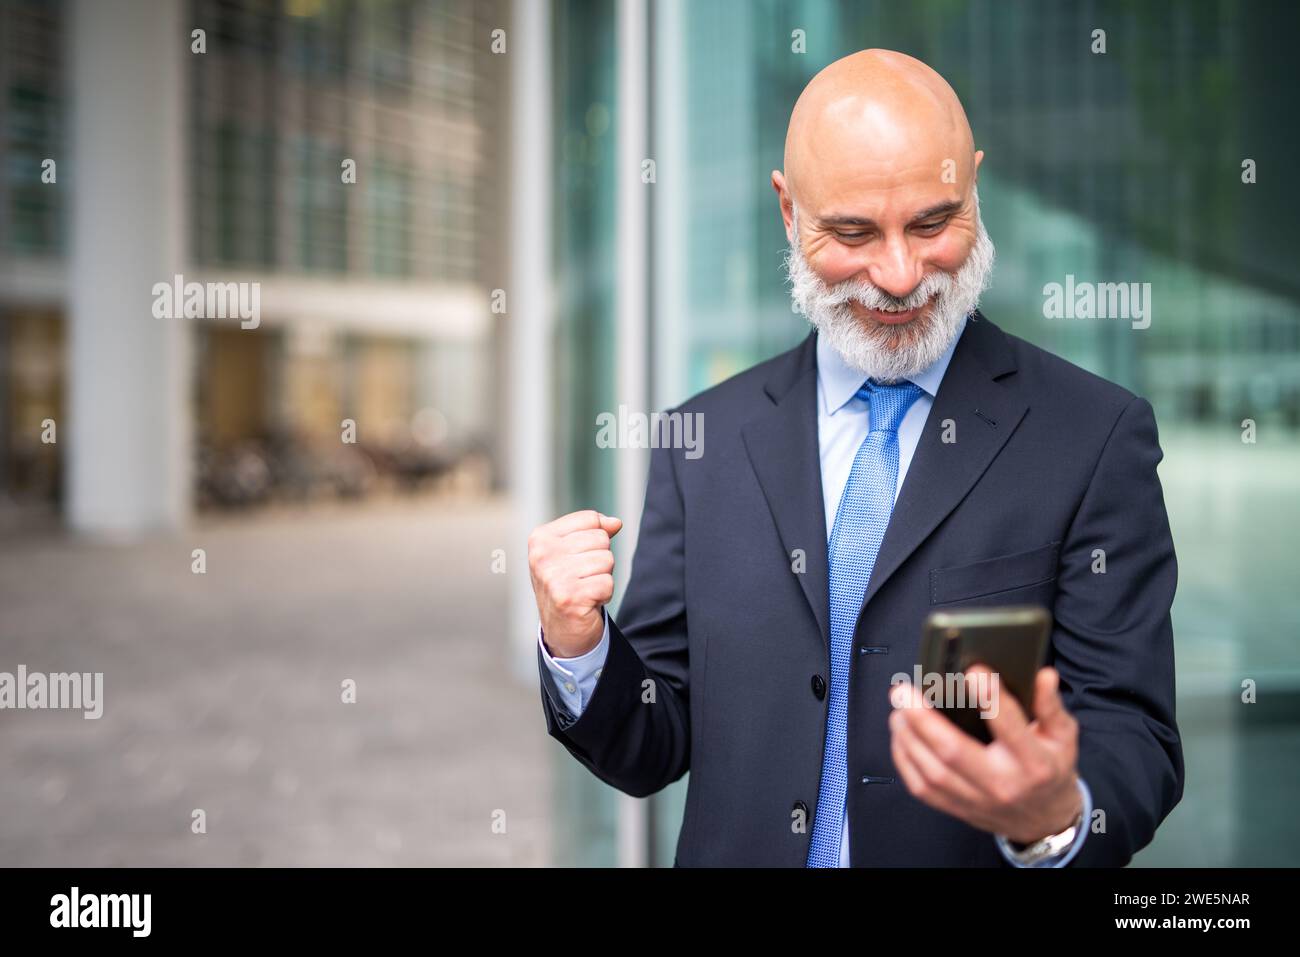 Very happy businessman looking at his phone, good news concept Stock Photo